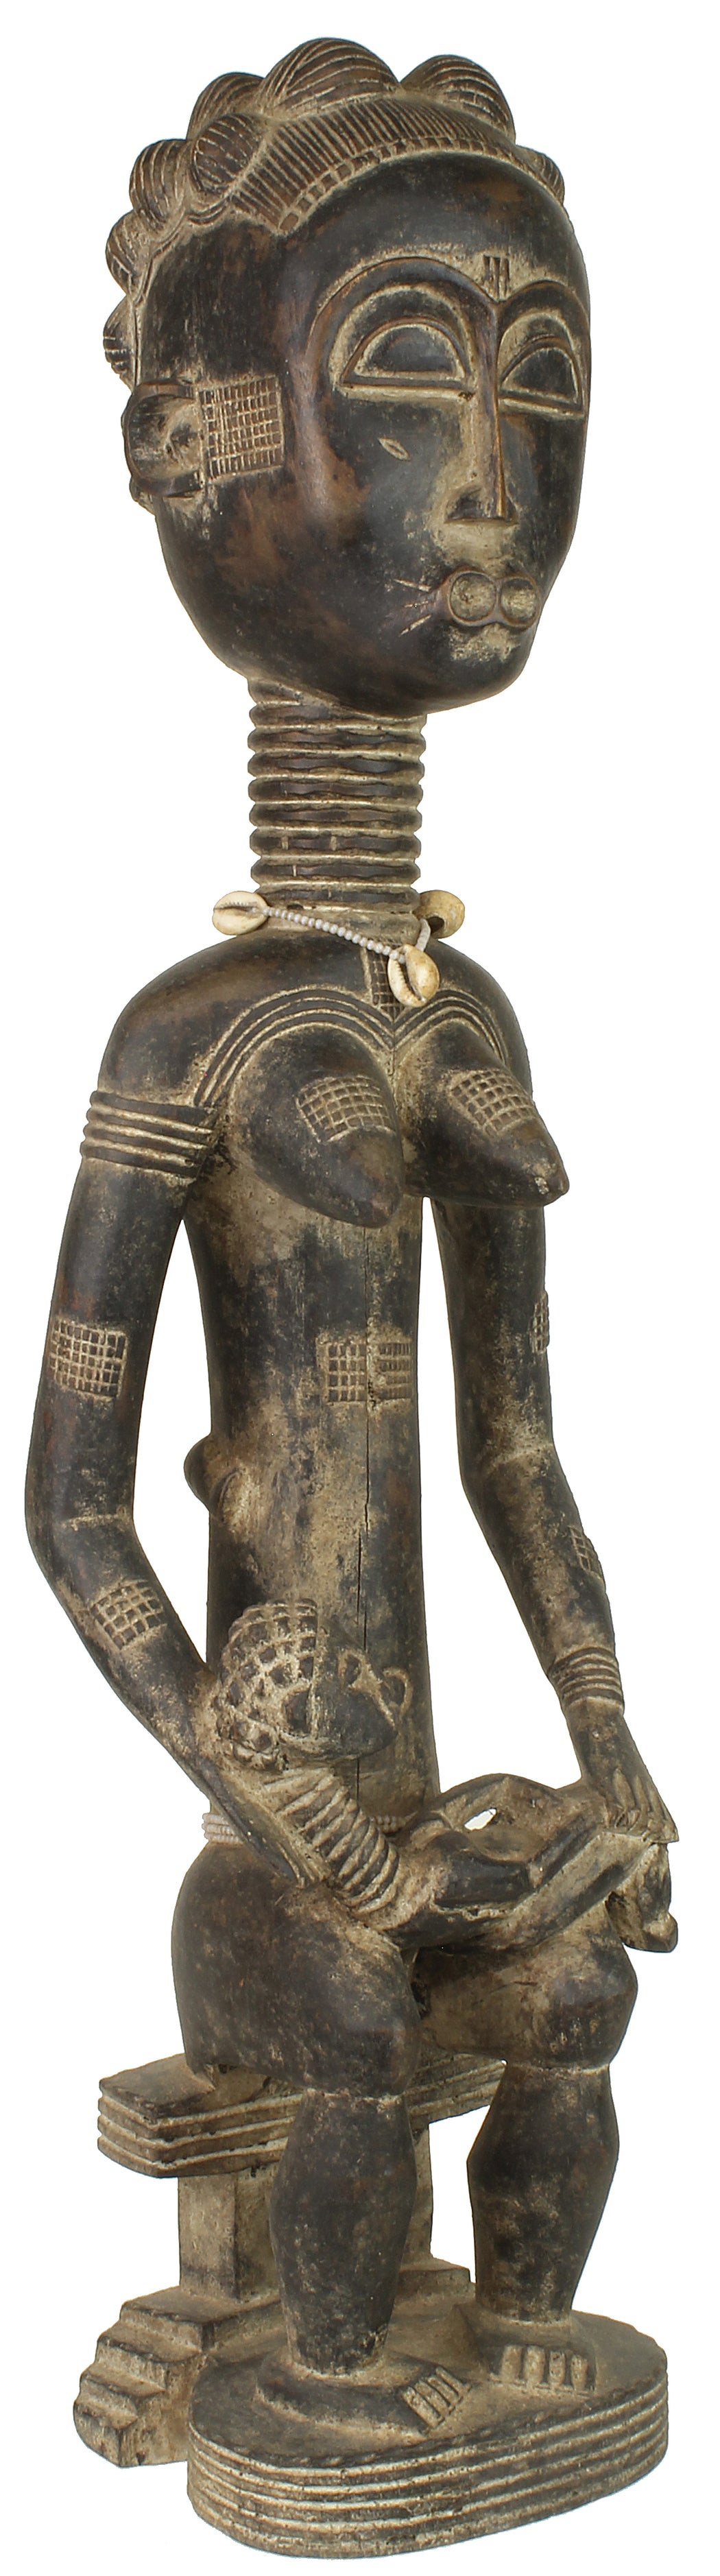 Very Tall Seated Baule Mother and Child Spirit Statue | 30" - Niger Bend